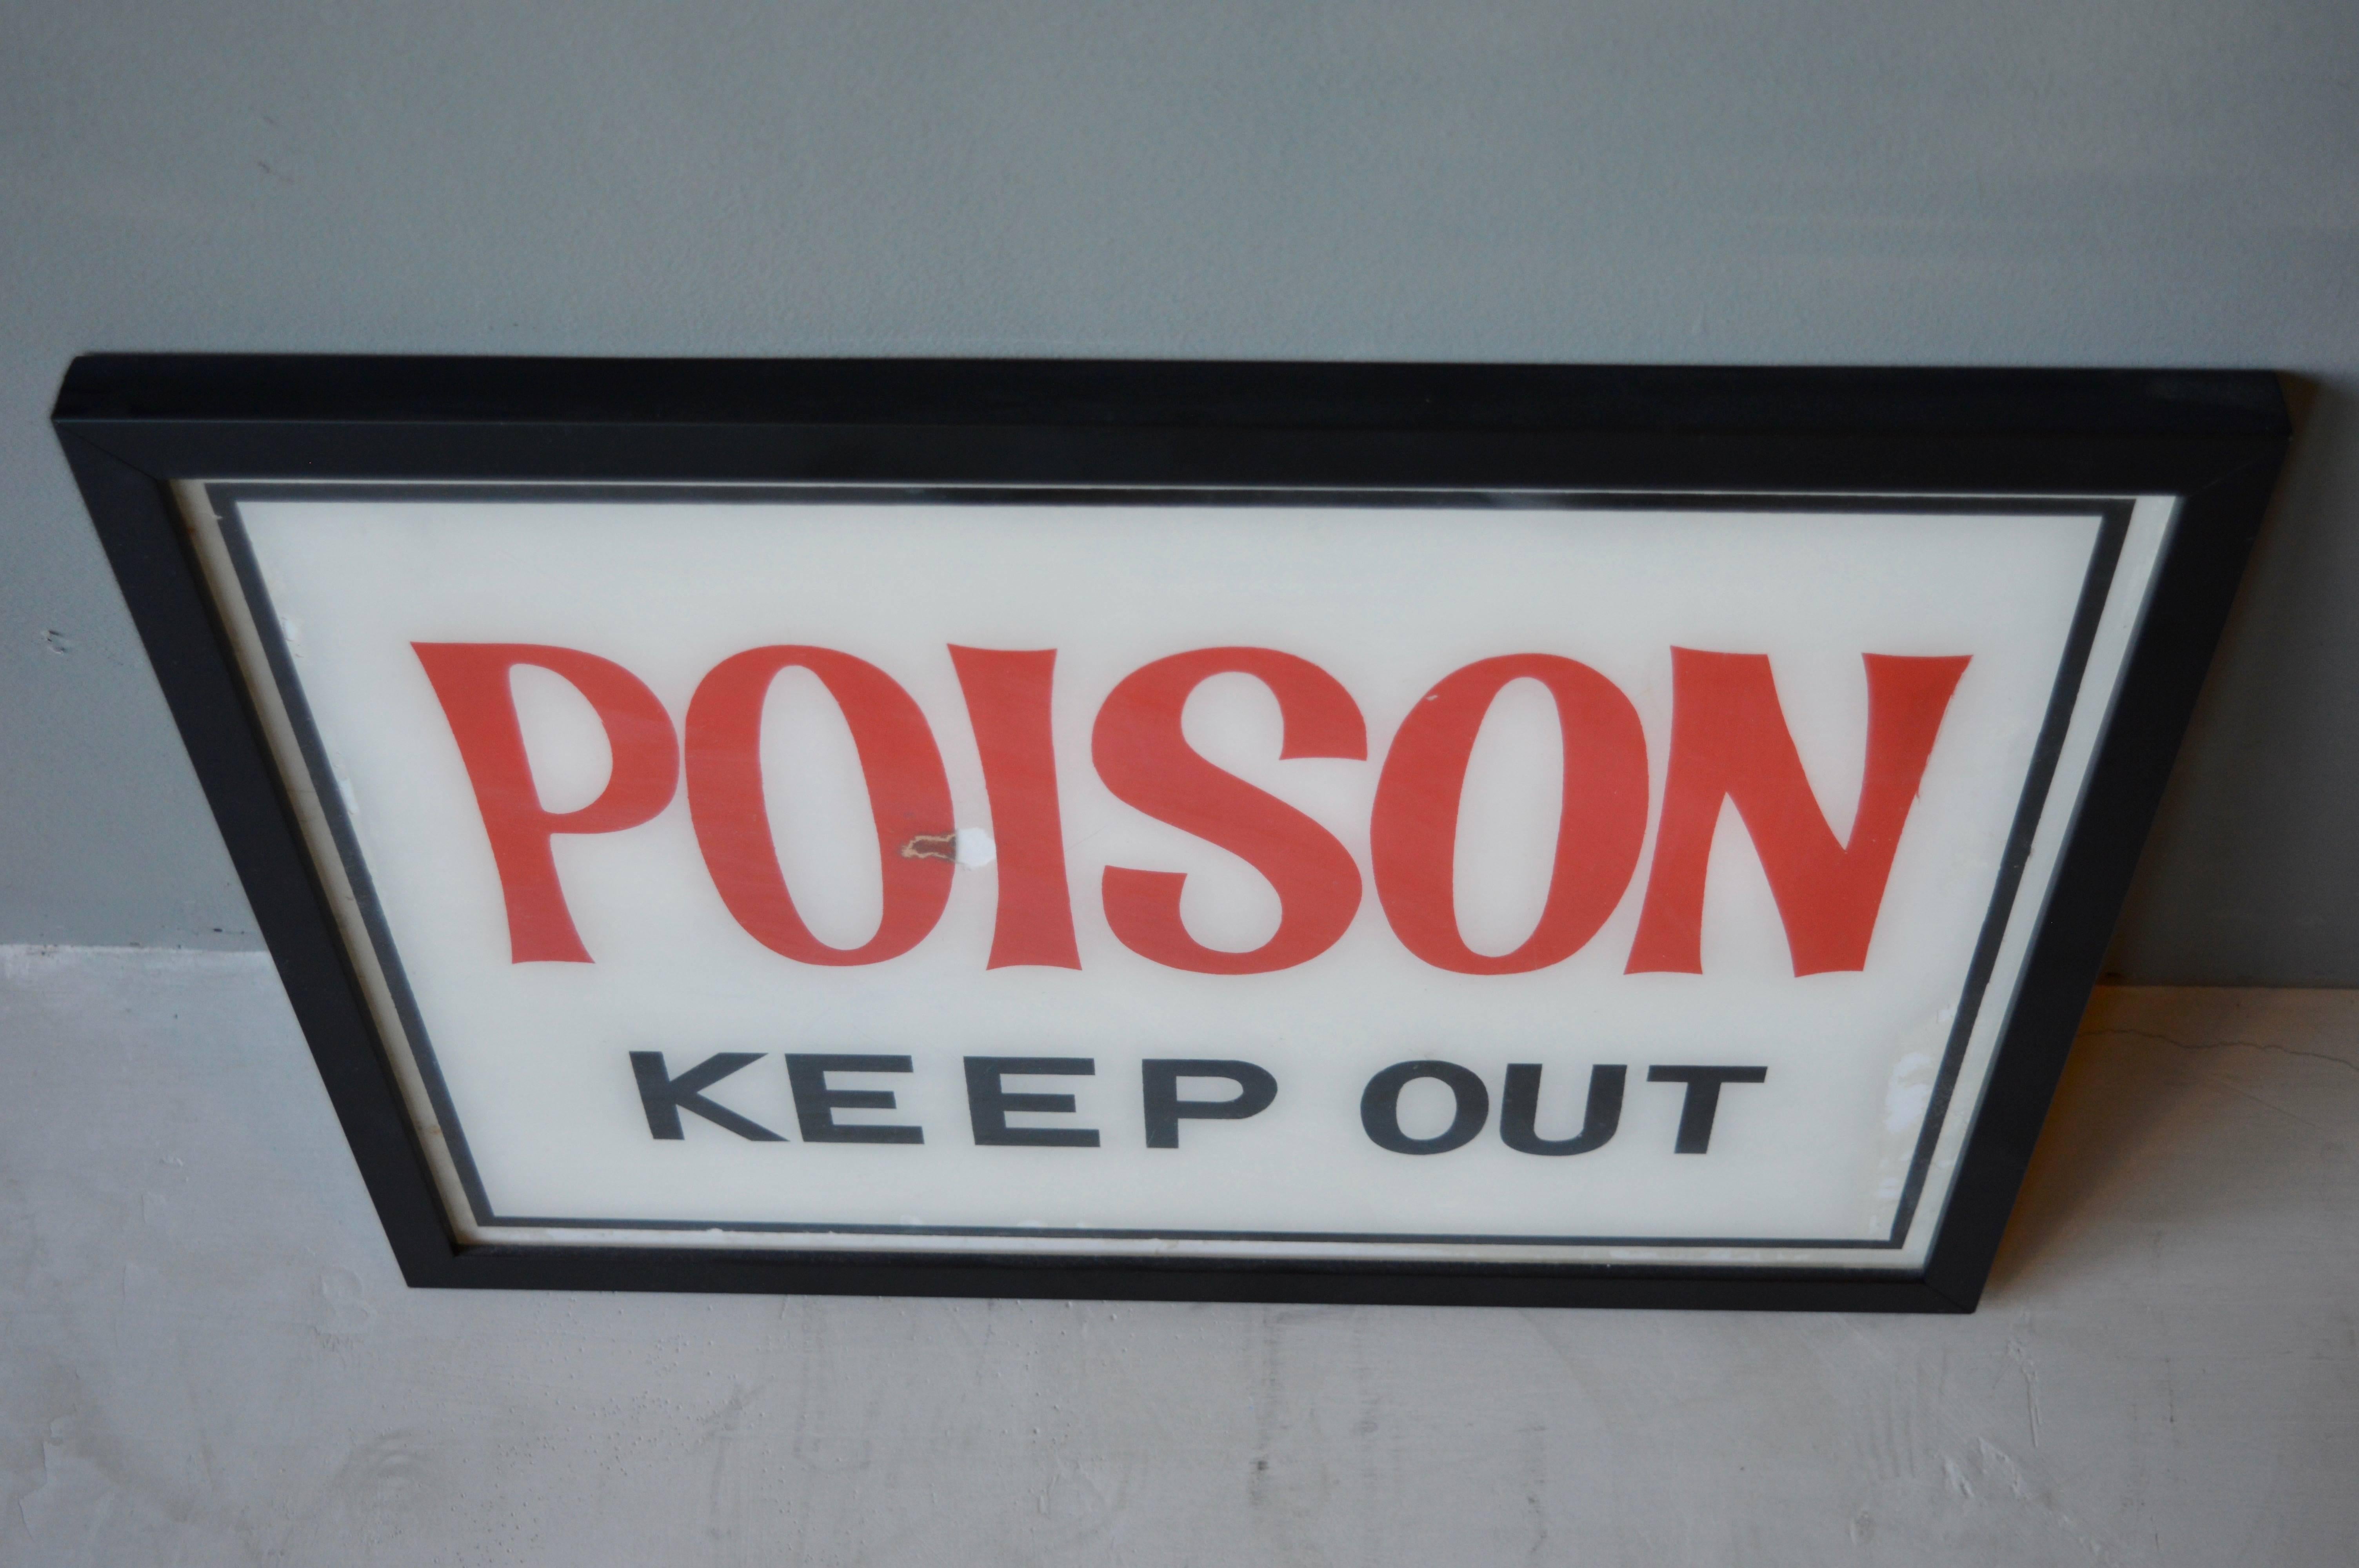 Very rare vintage Poision - Keep Out sign. Very thin paper framed behind glass. One blemish in center does not detract from this unique piece of art. Excellent vintage condition.